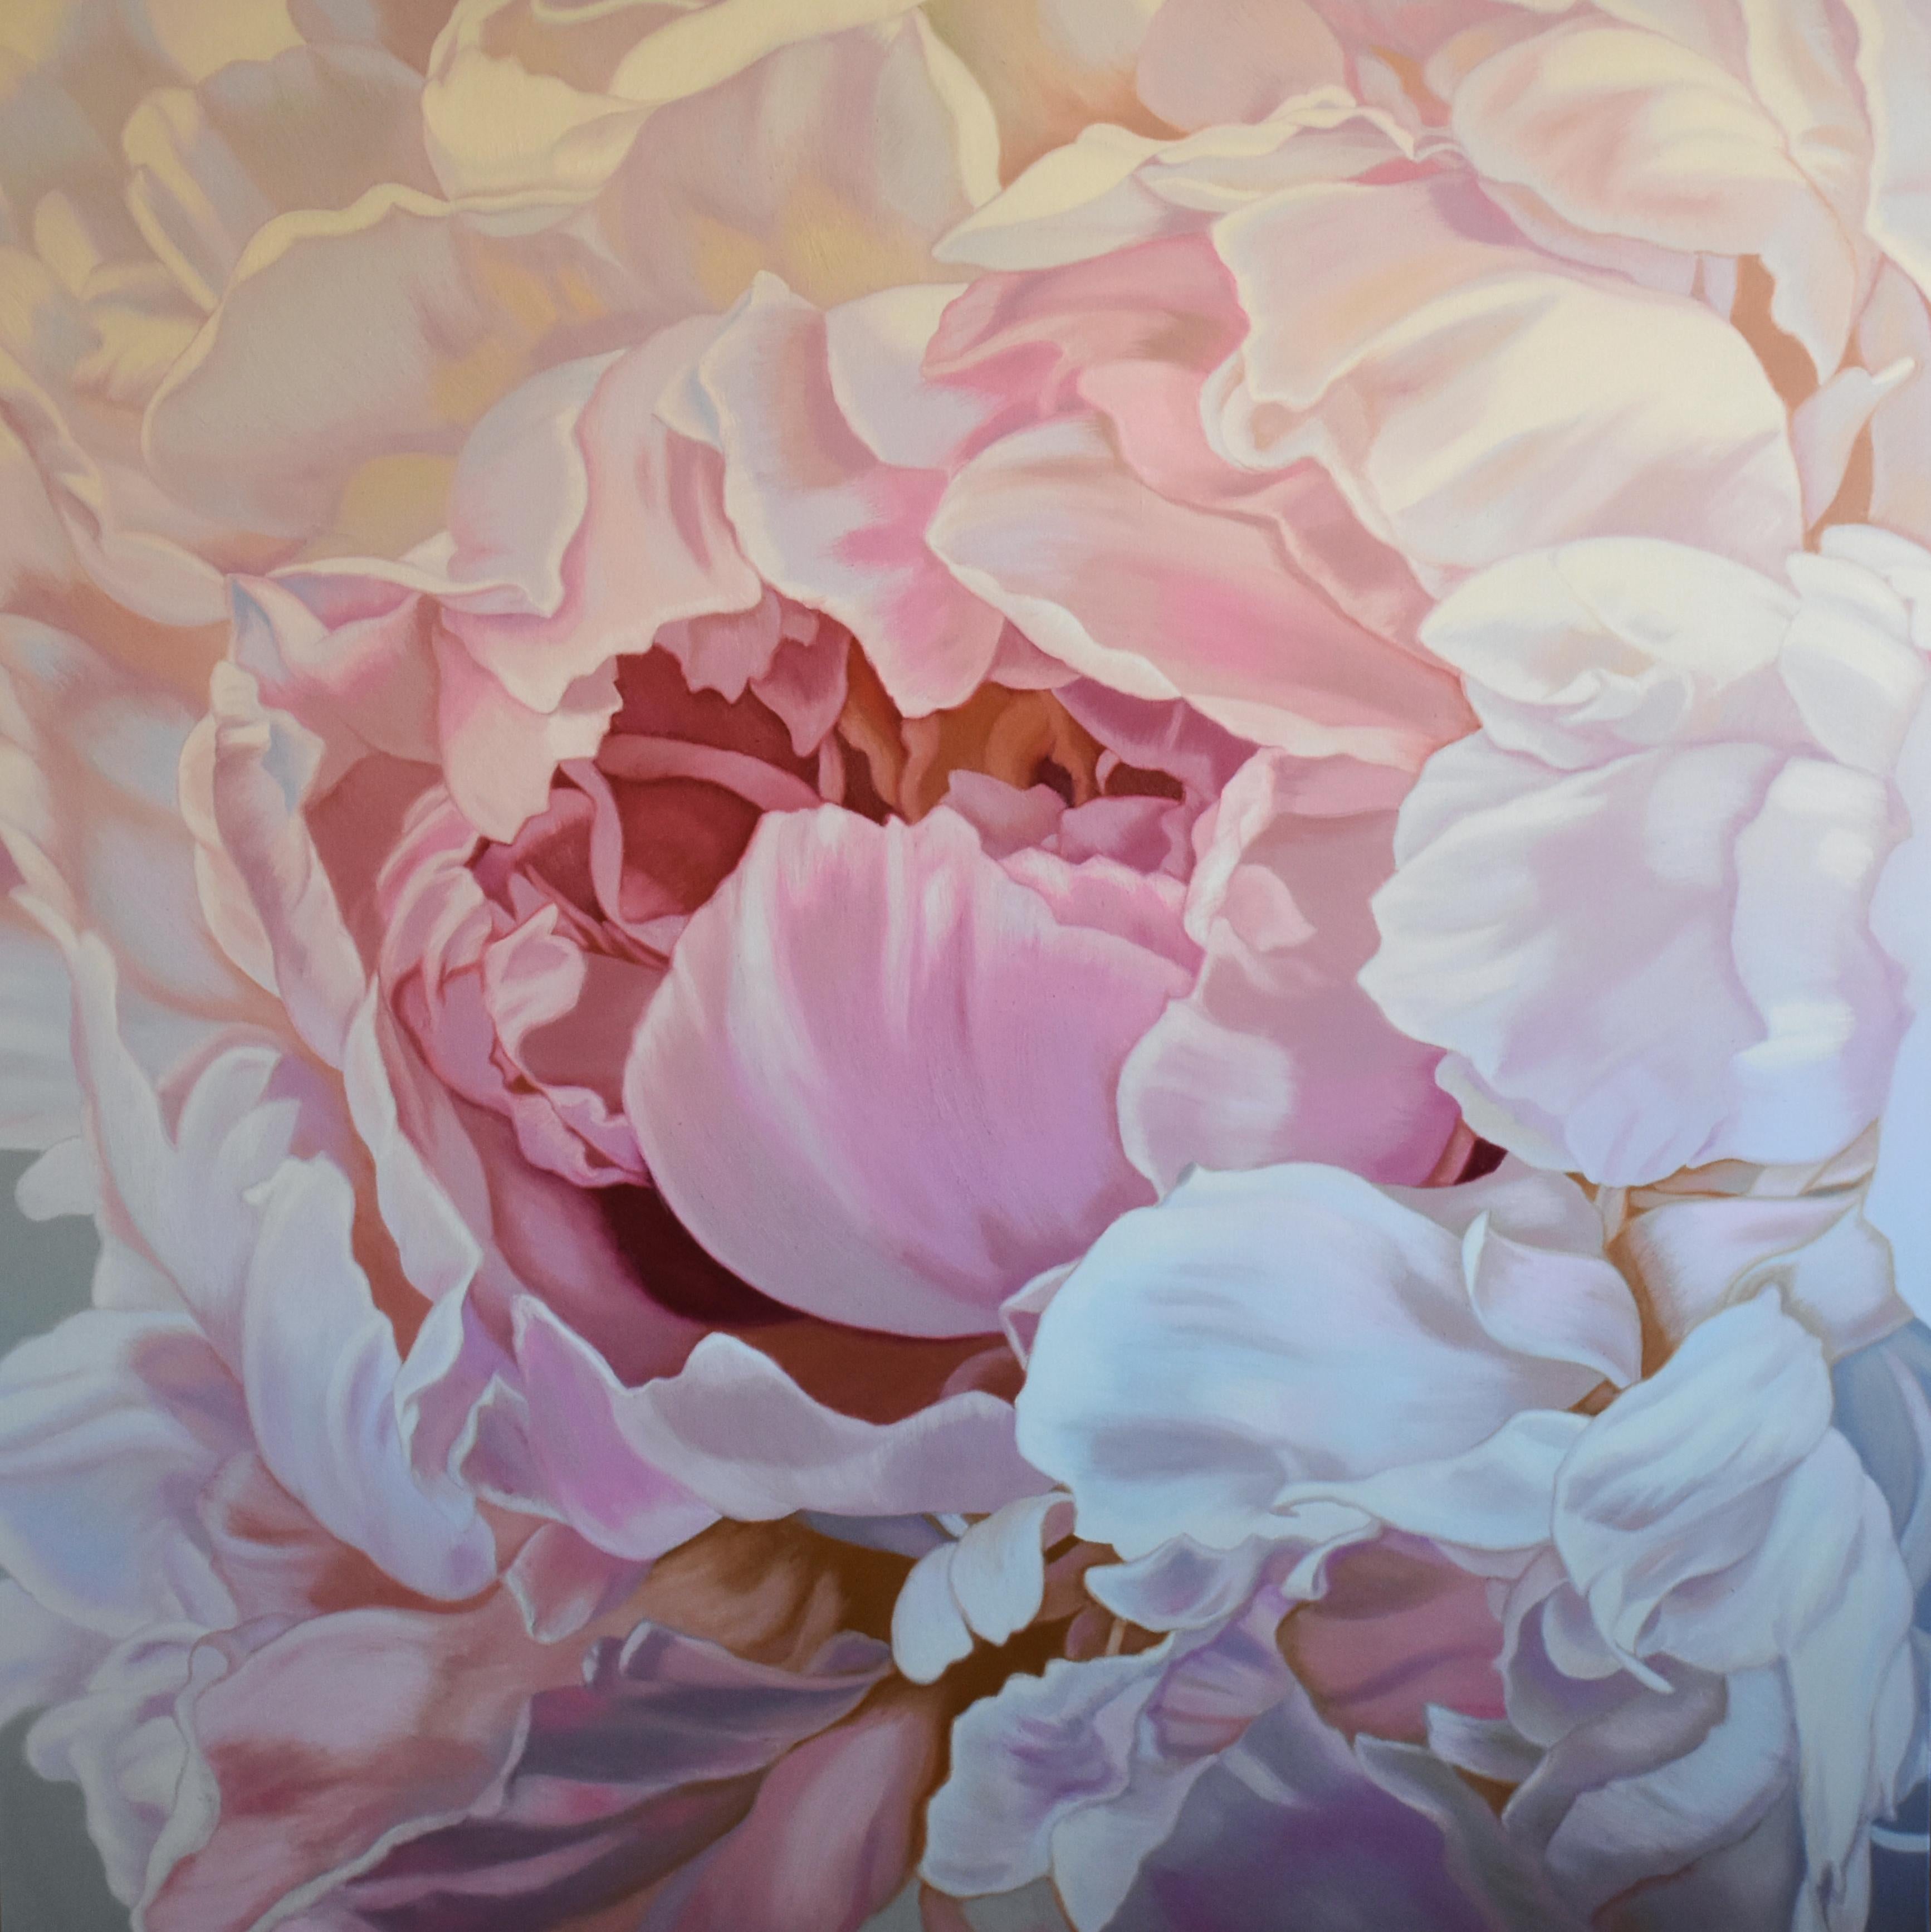 "Pink Peony" Oil Painting-  pink, red, monochrome, flower, flowers, still life - Mixed Media Art by Chloe Hedden